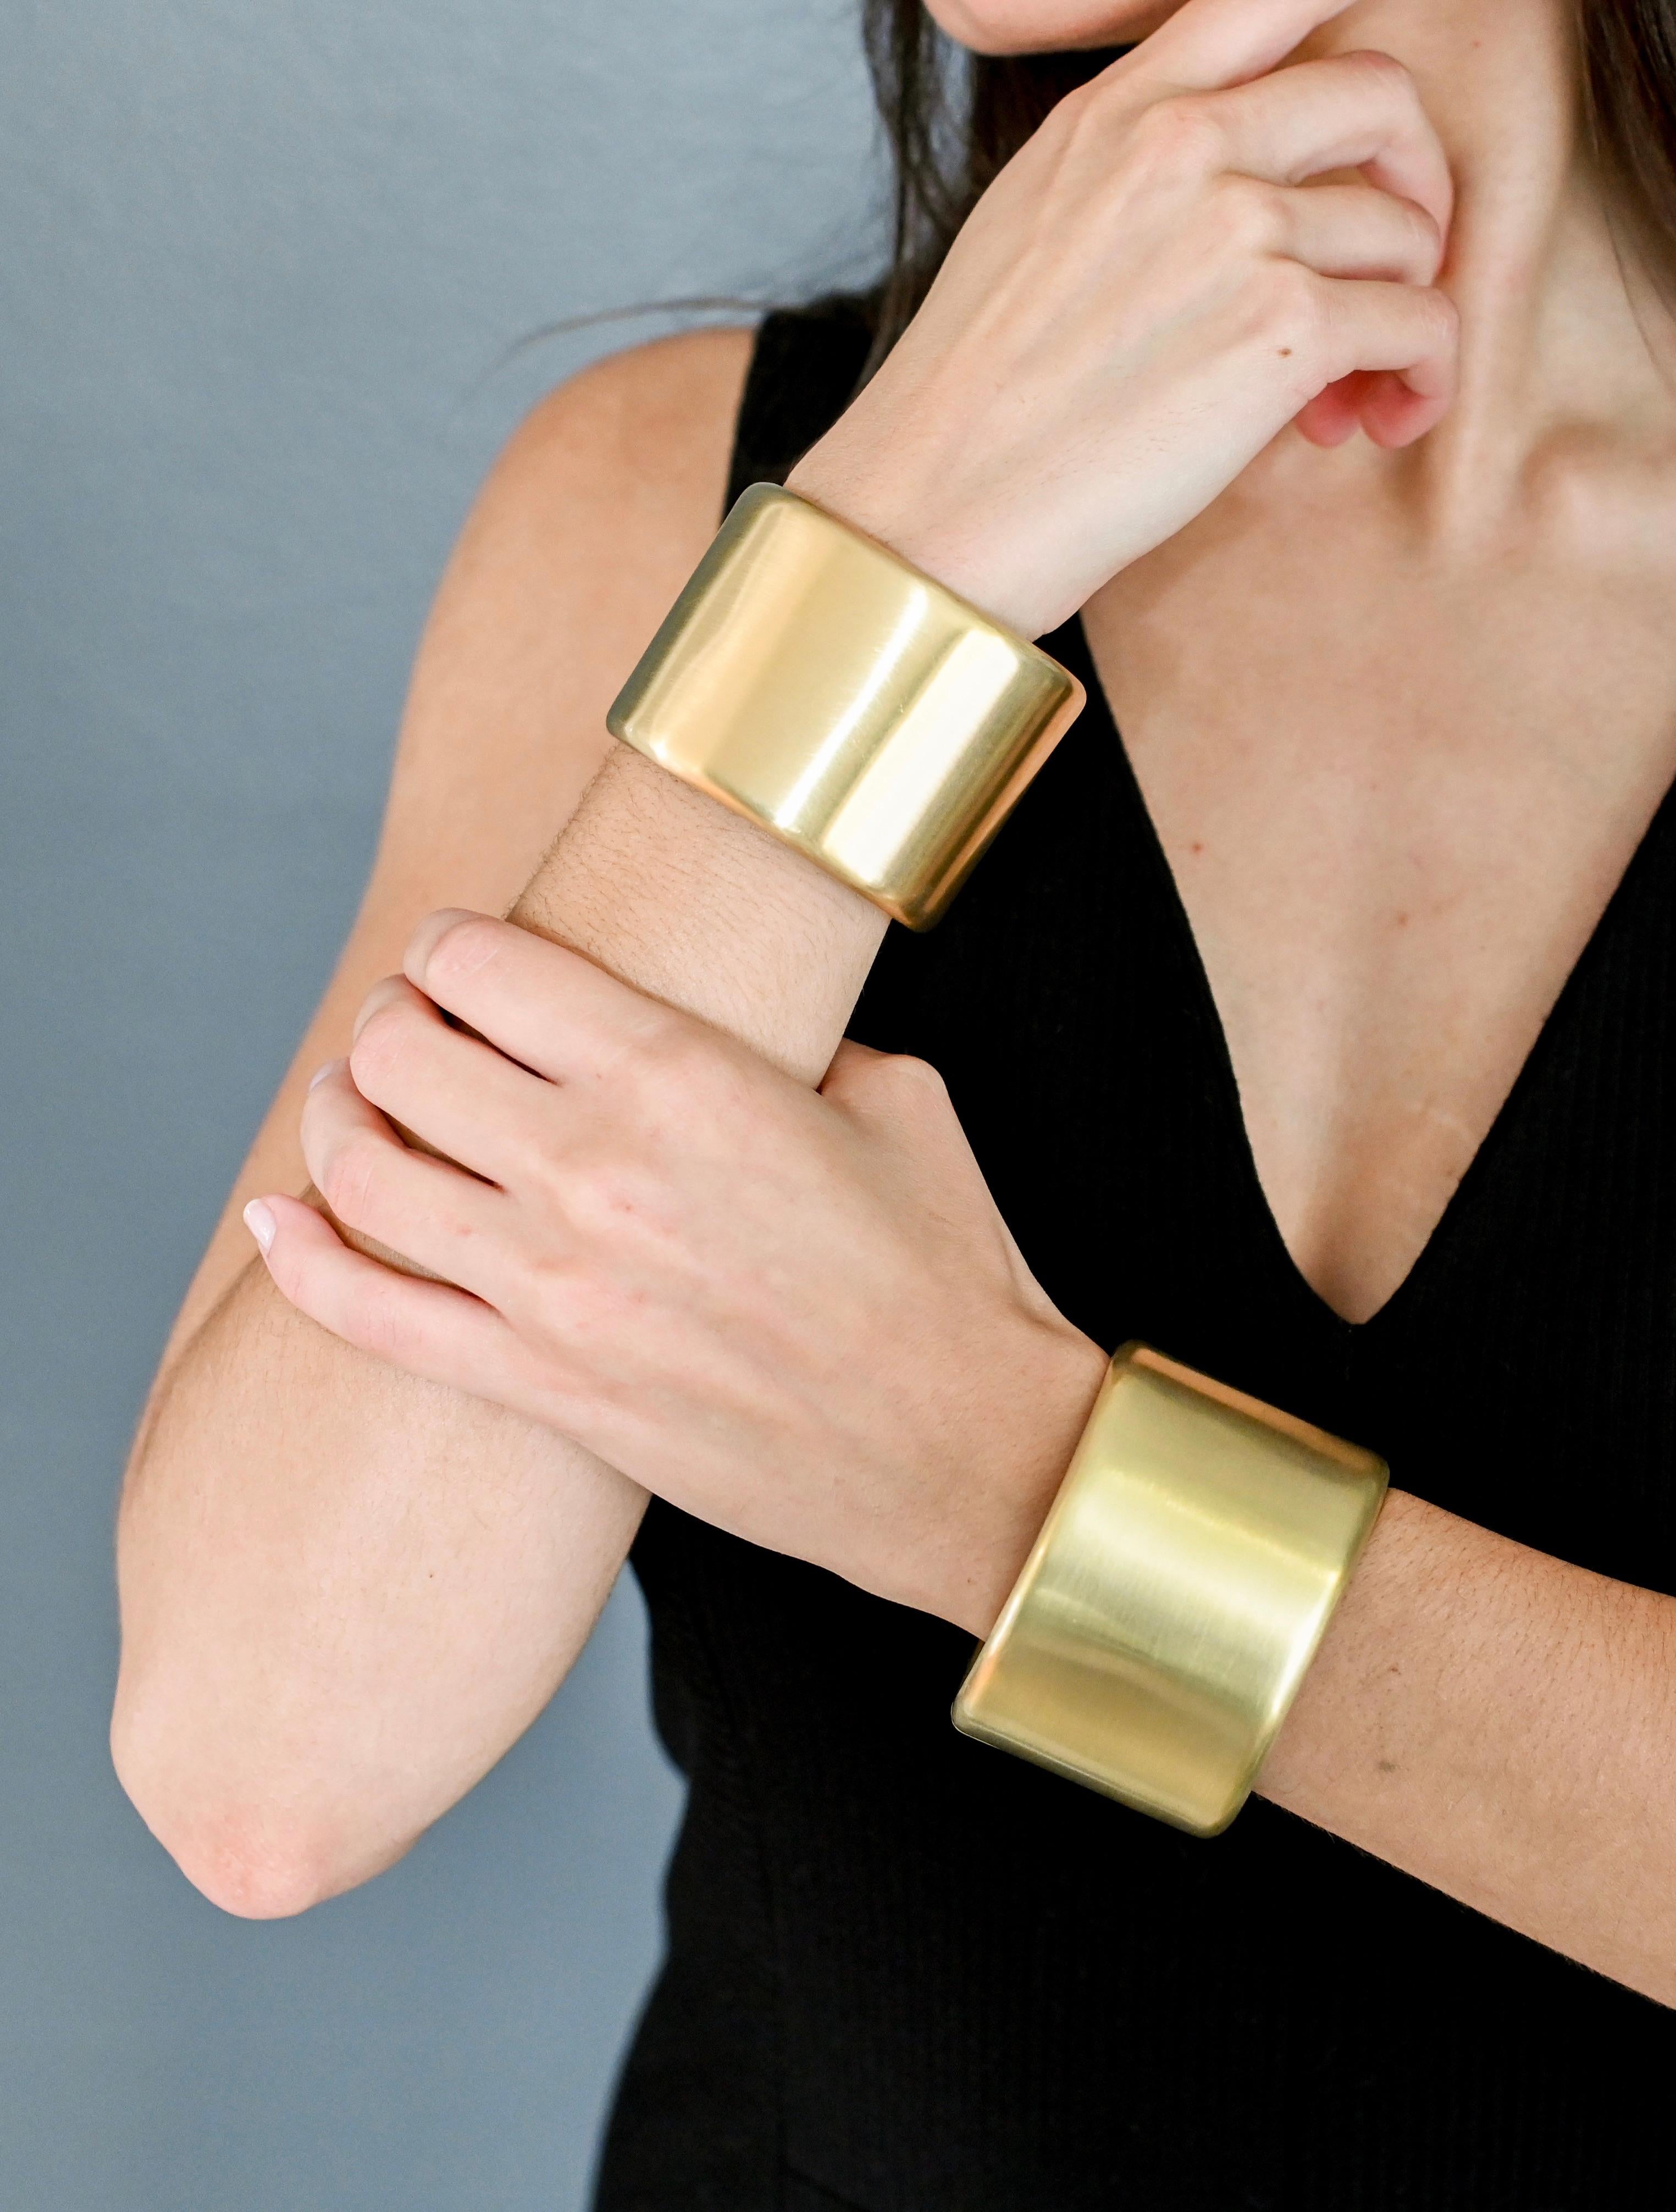 A magnificent piece of jewelry where art and design mesh perfectly.
Fabricated entirely by hand in solid 18K green gold, a cuff that is timeless and classic yet so relevant for today's contemporary style. Hand-burnished for a soft, satin-matte